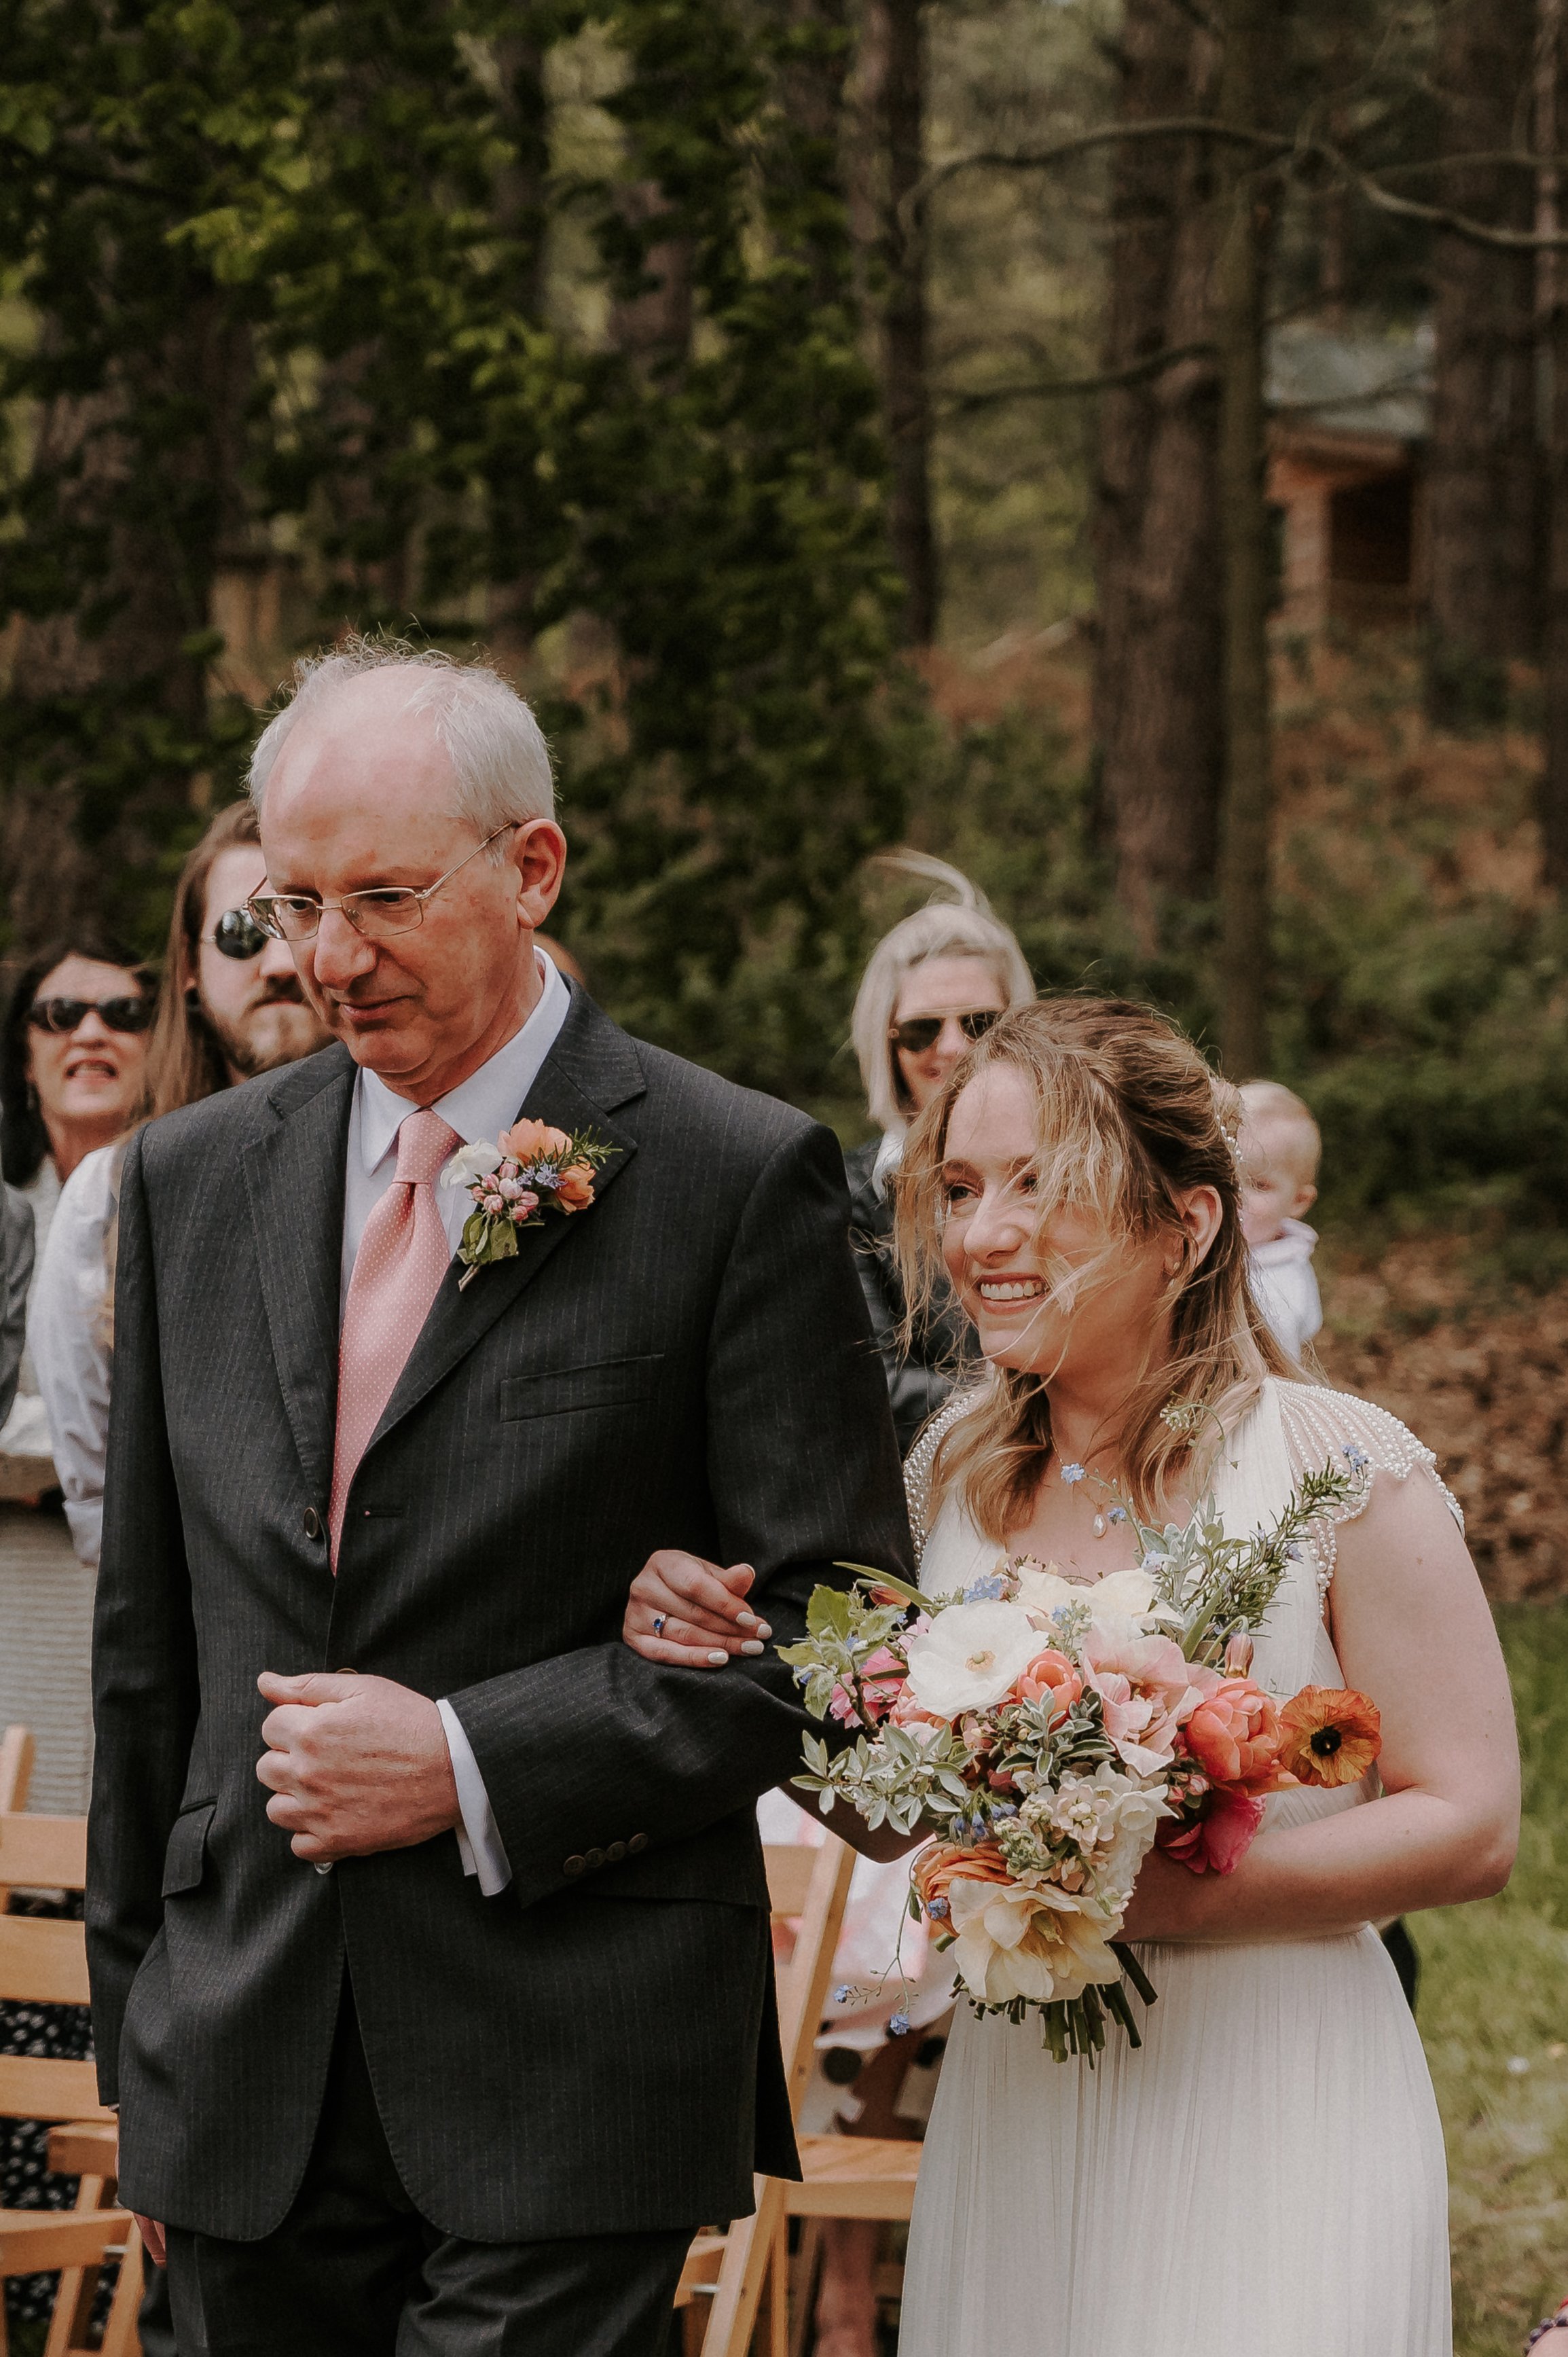 A heartfelt moment as a bride walks the aisle arm-in-arm with her Father